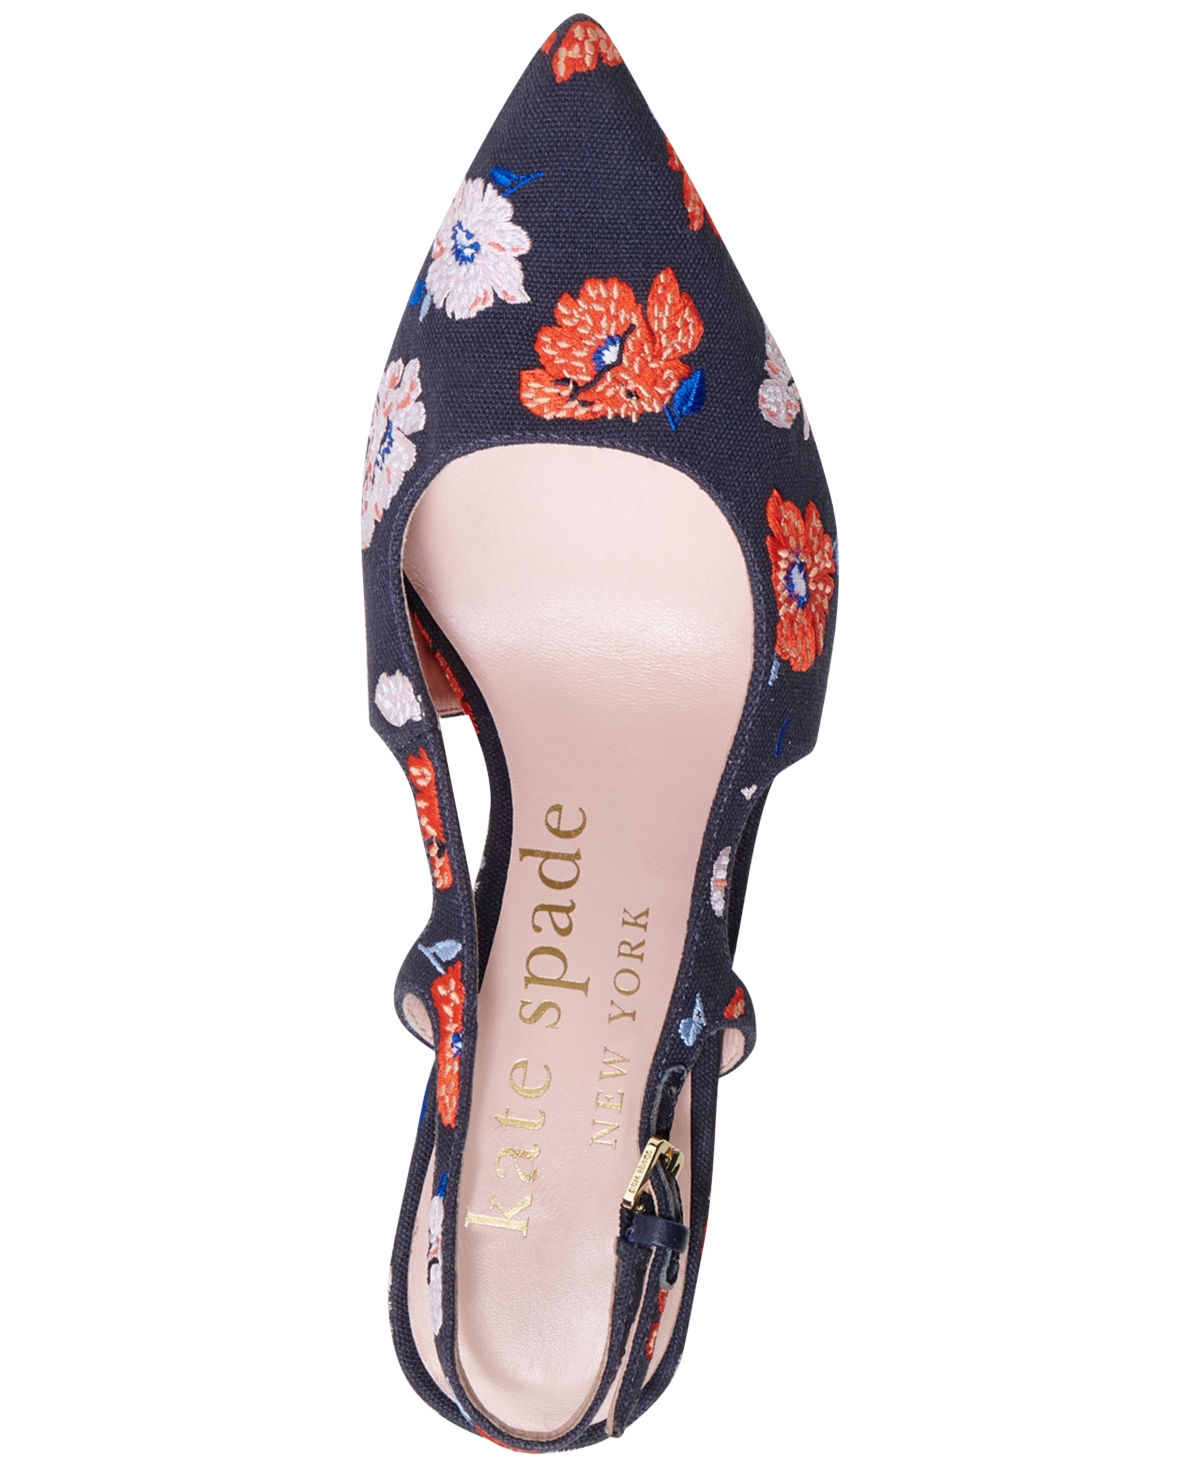 Shop Kate Spade Valerie Pointed-toe Slingback Pumps In Captain Navy Dotty Floral